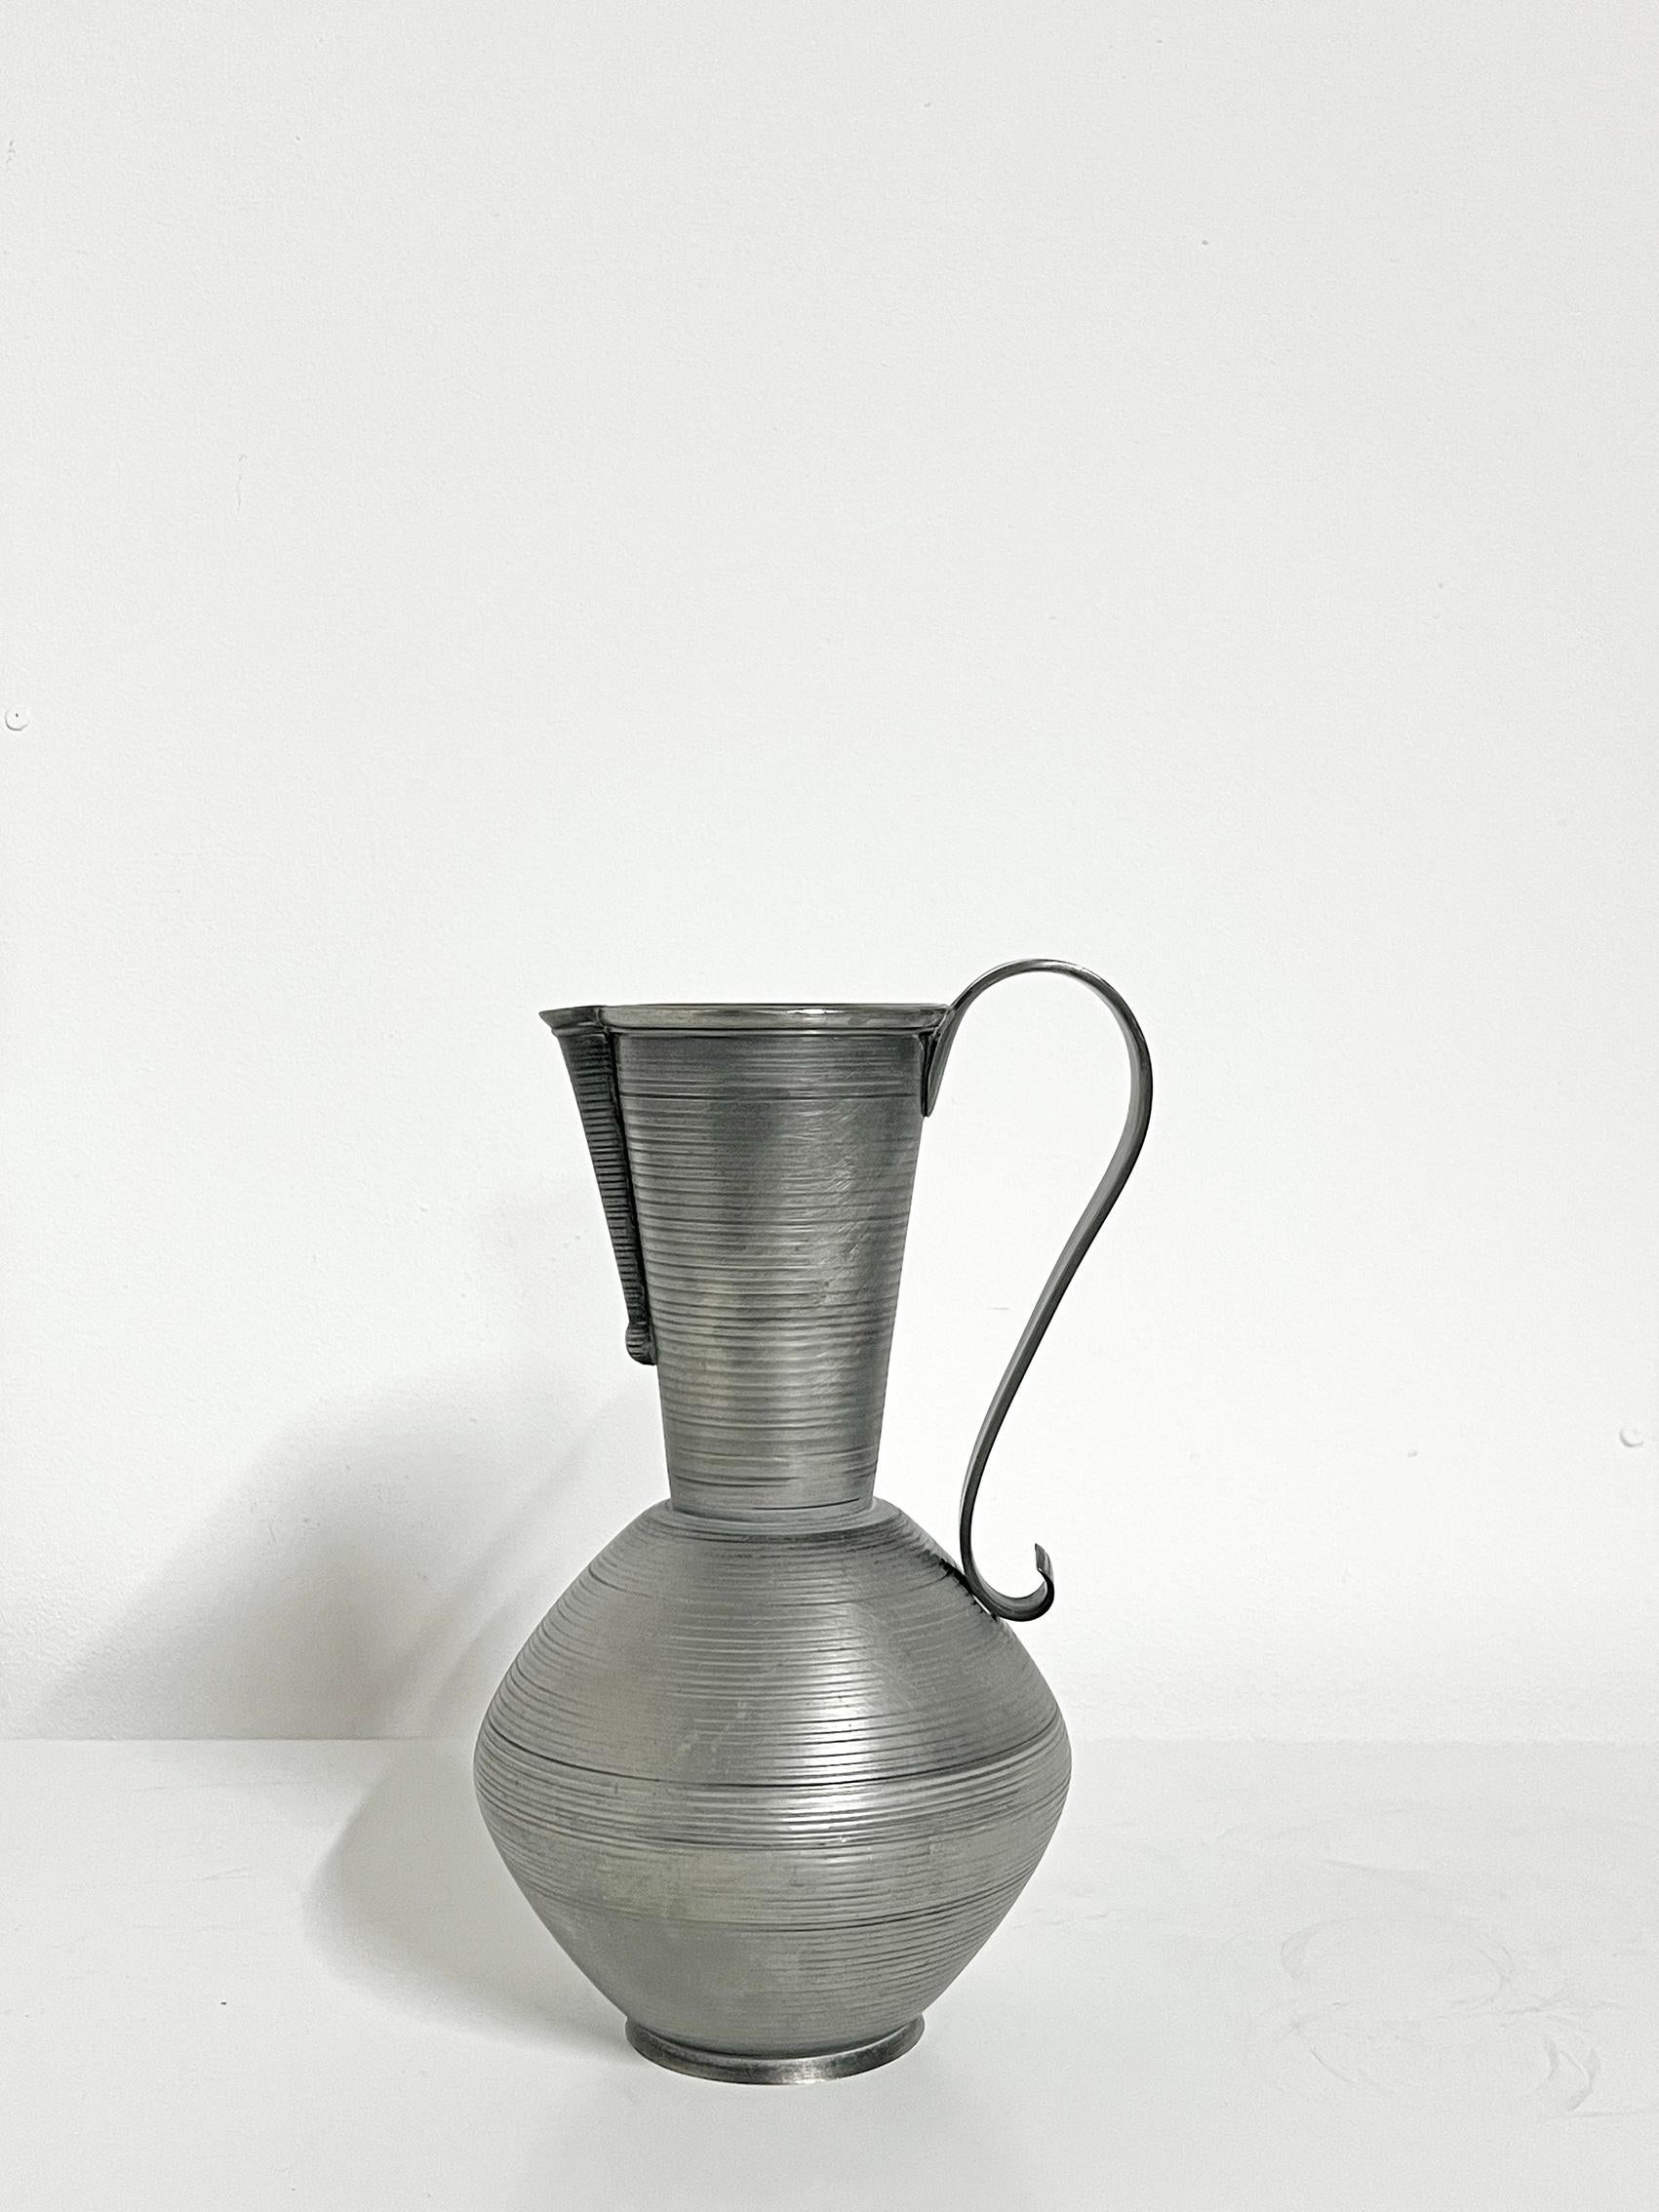 Rare Scandinavian Modern pitcher in pewter by Gunnar Havstad, Norway, ca 1930-40s. 
Signed underneath.
Wear and patina consistent with age and use. 
Scratches, marks and blemishes, smaller dents. 